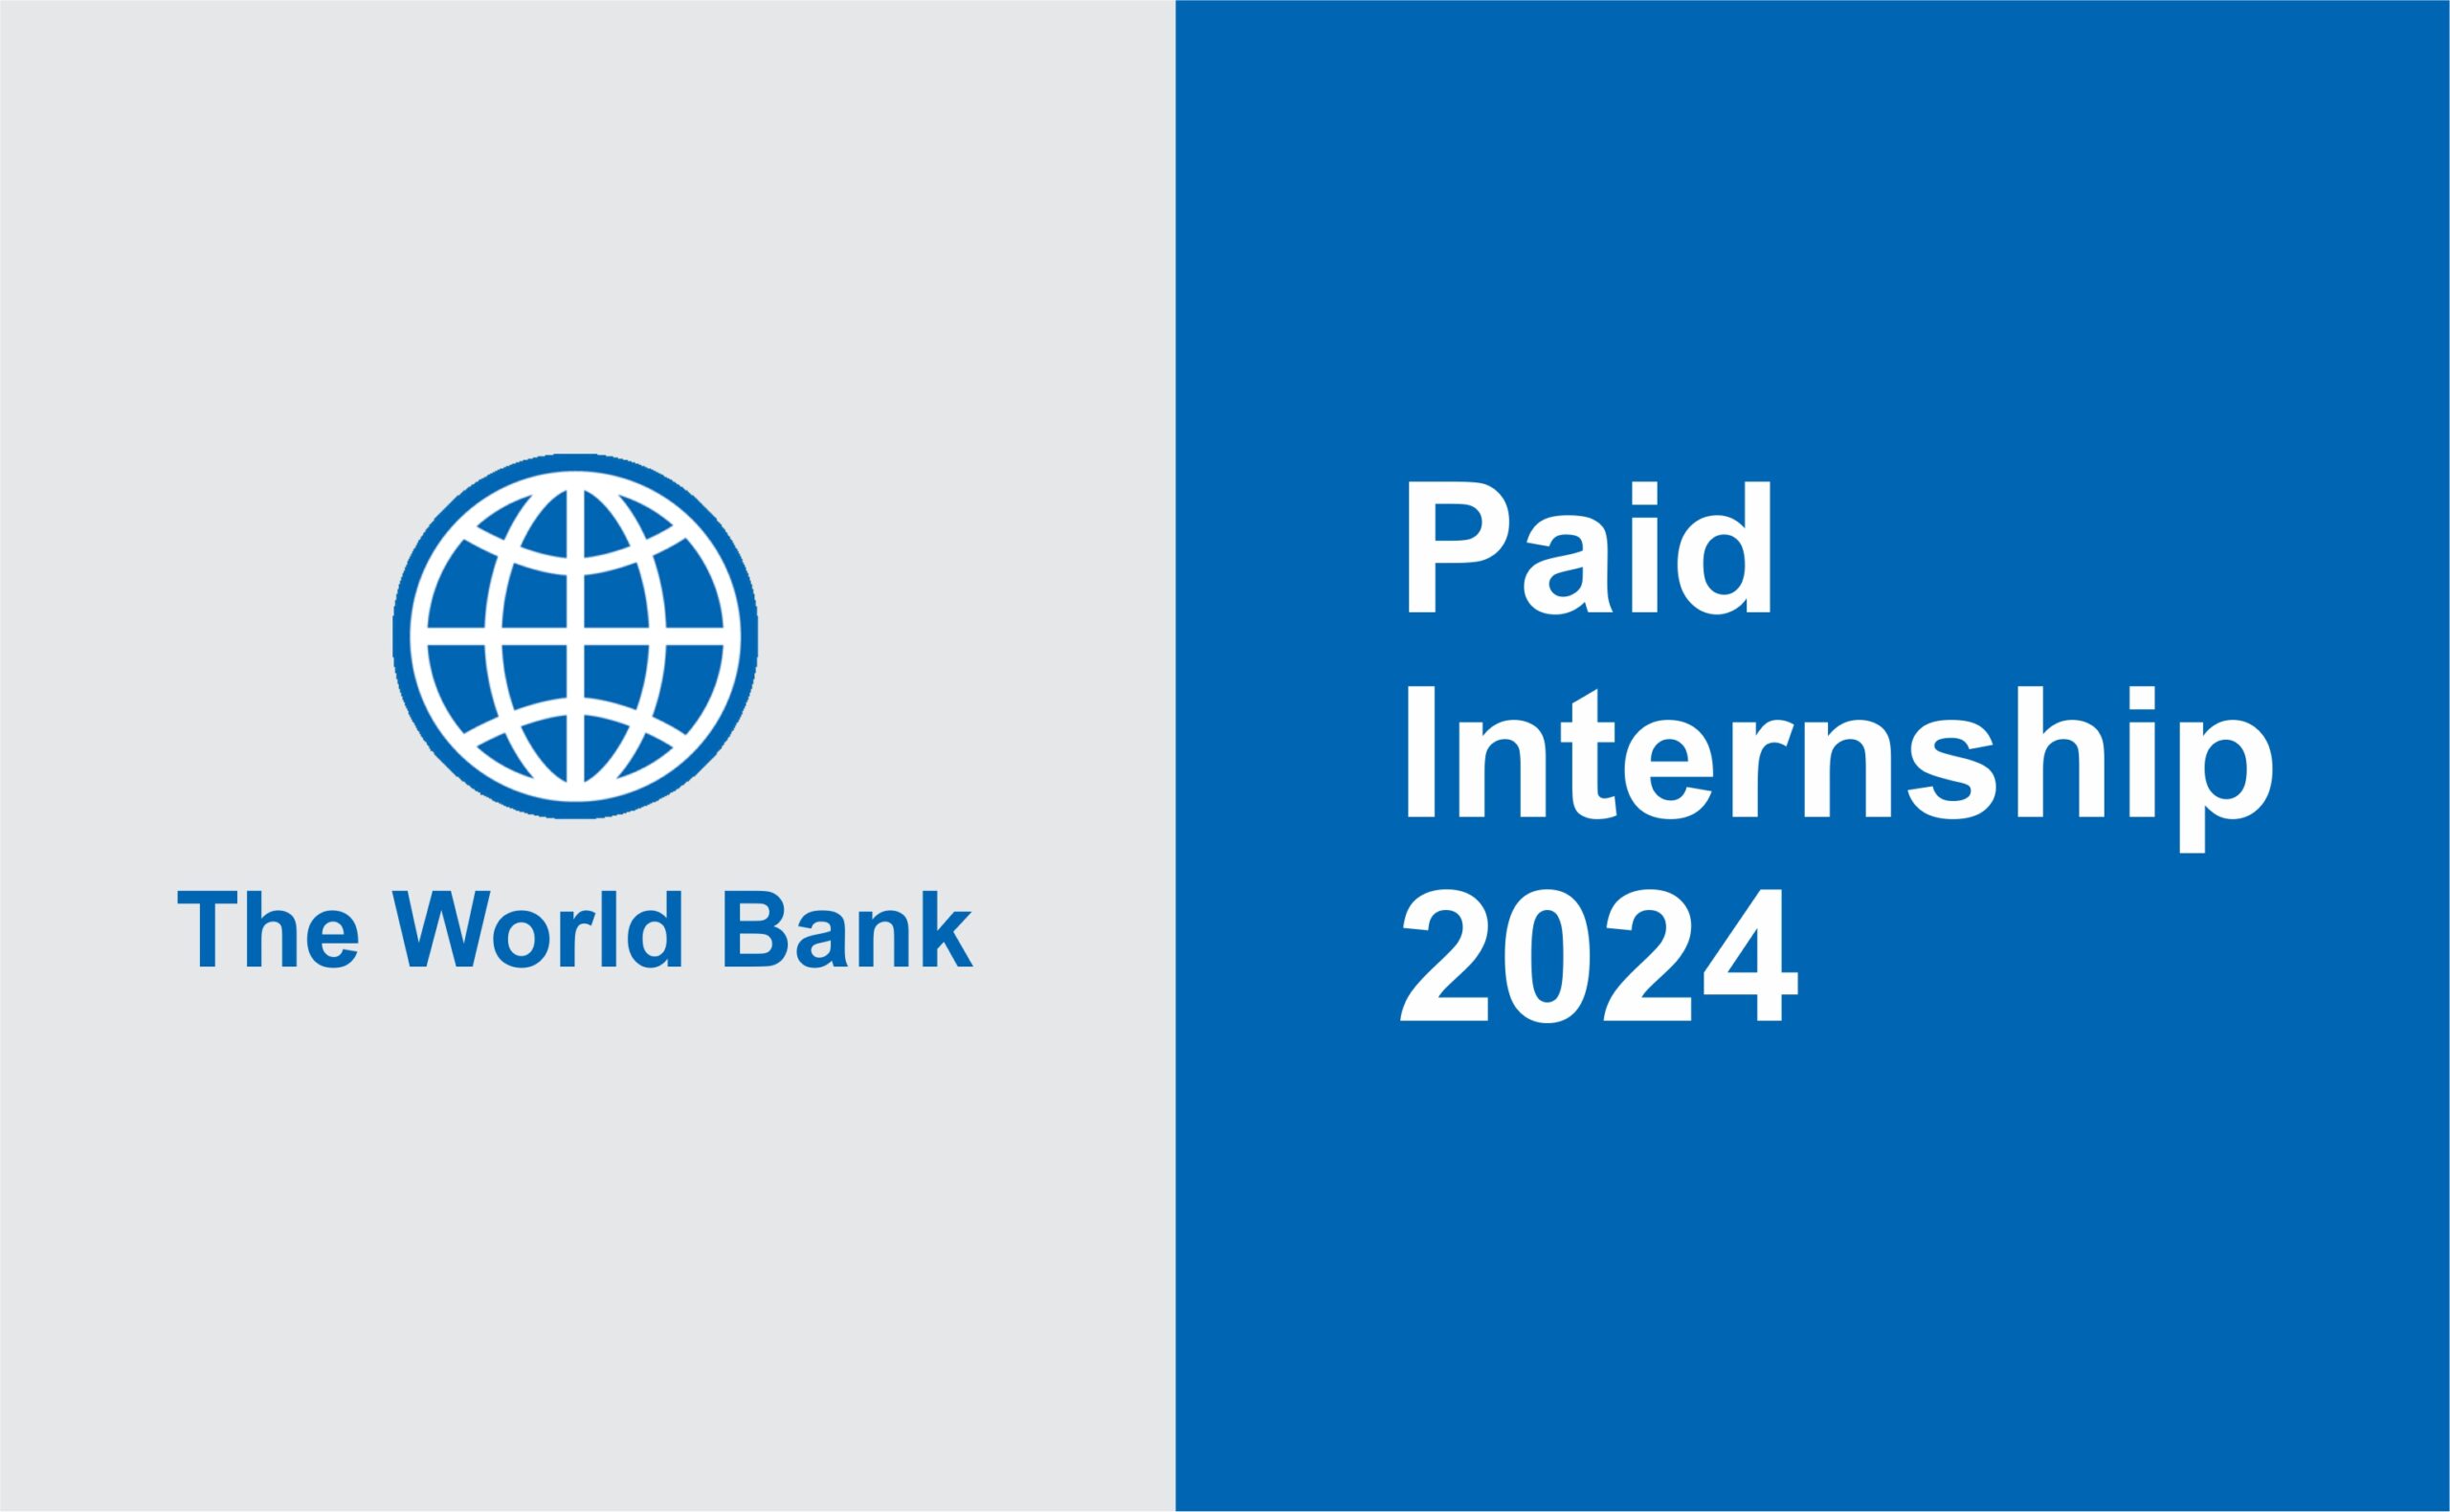 Paid Internship Opportunity at World Bank 2024 (Deadline: February 5th 2024)